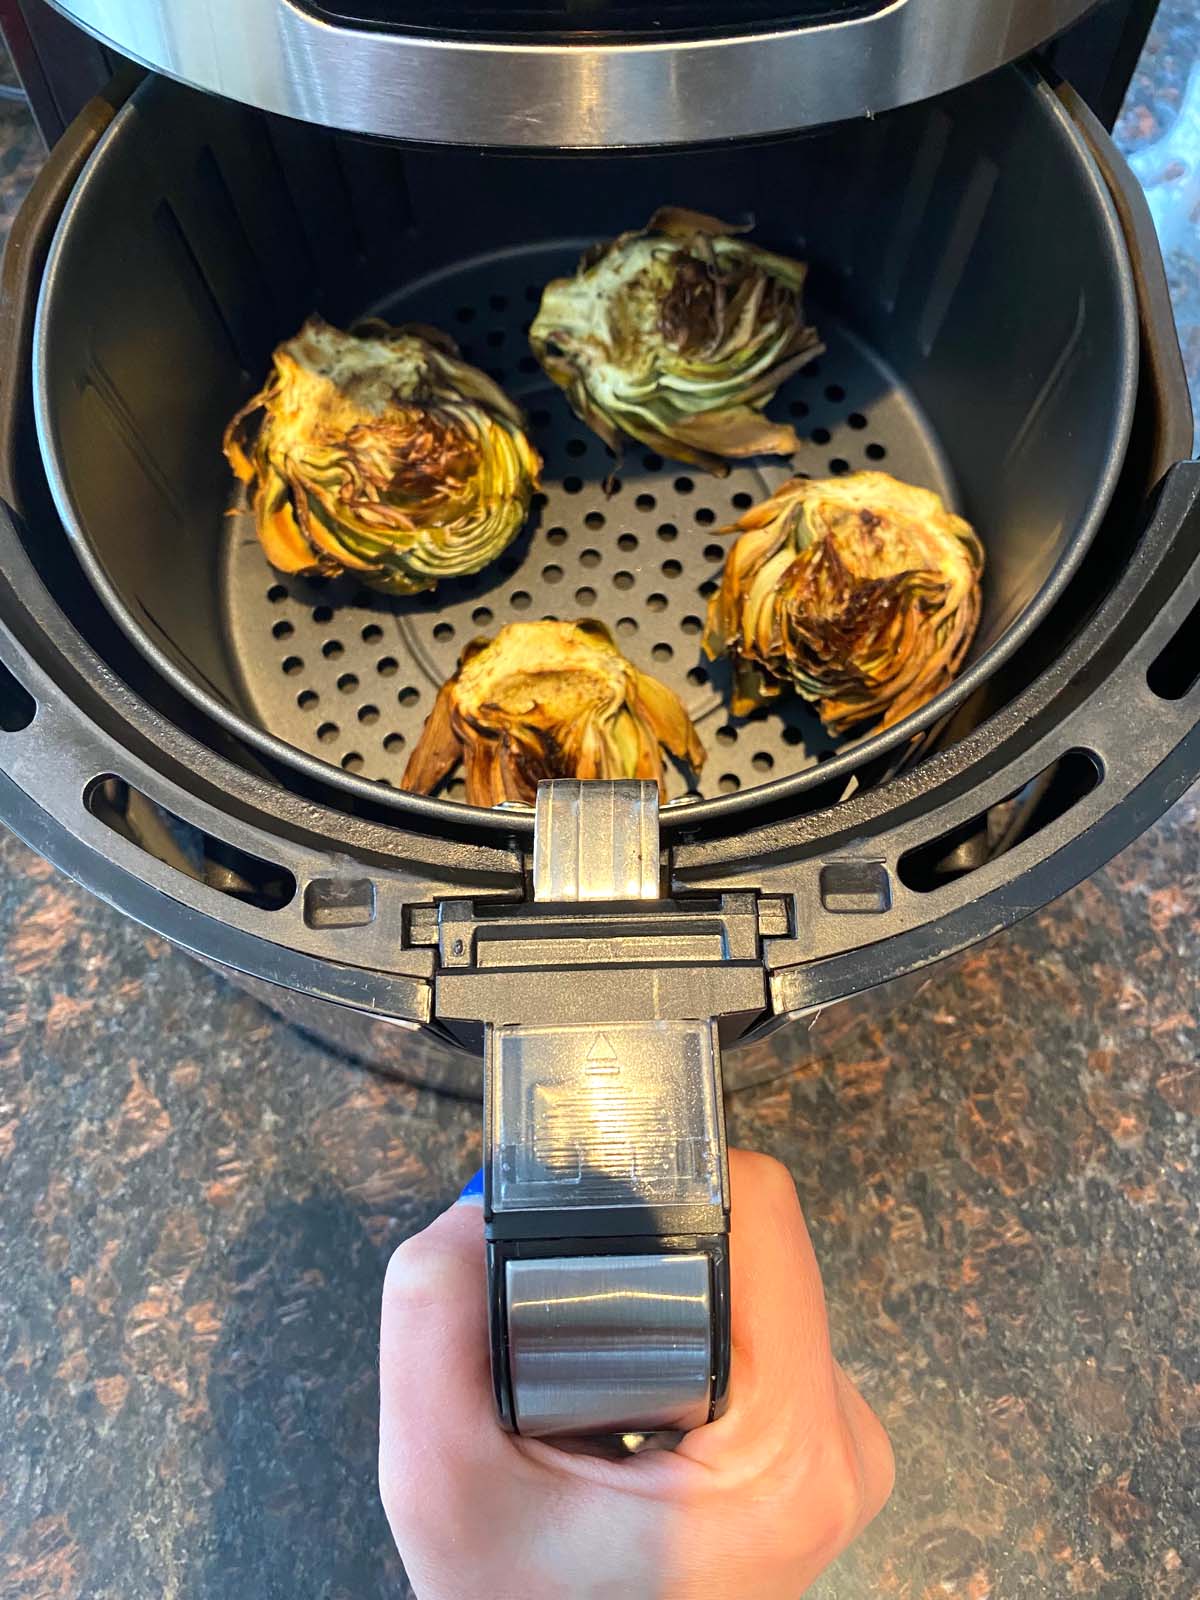 Basket of a table top convection oven with 4 artichoke halves cooked crispy.